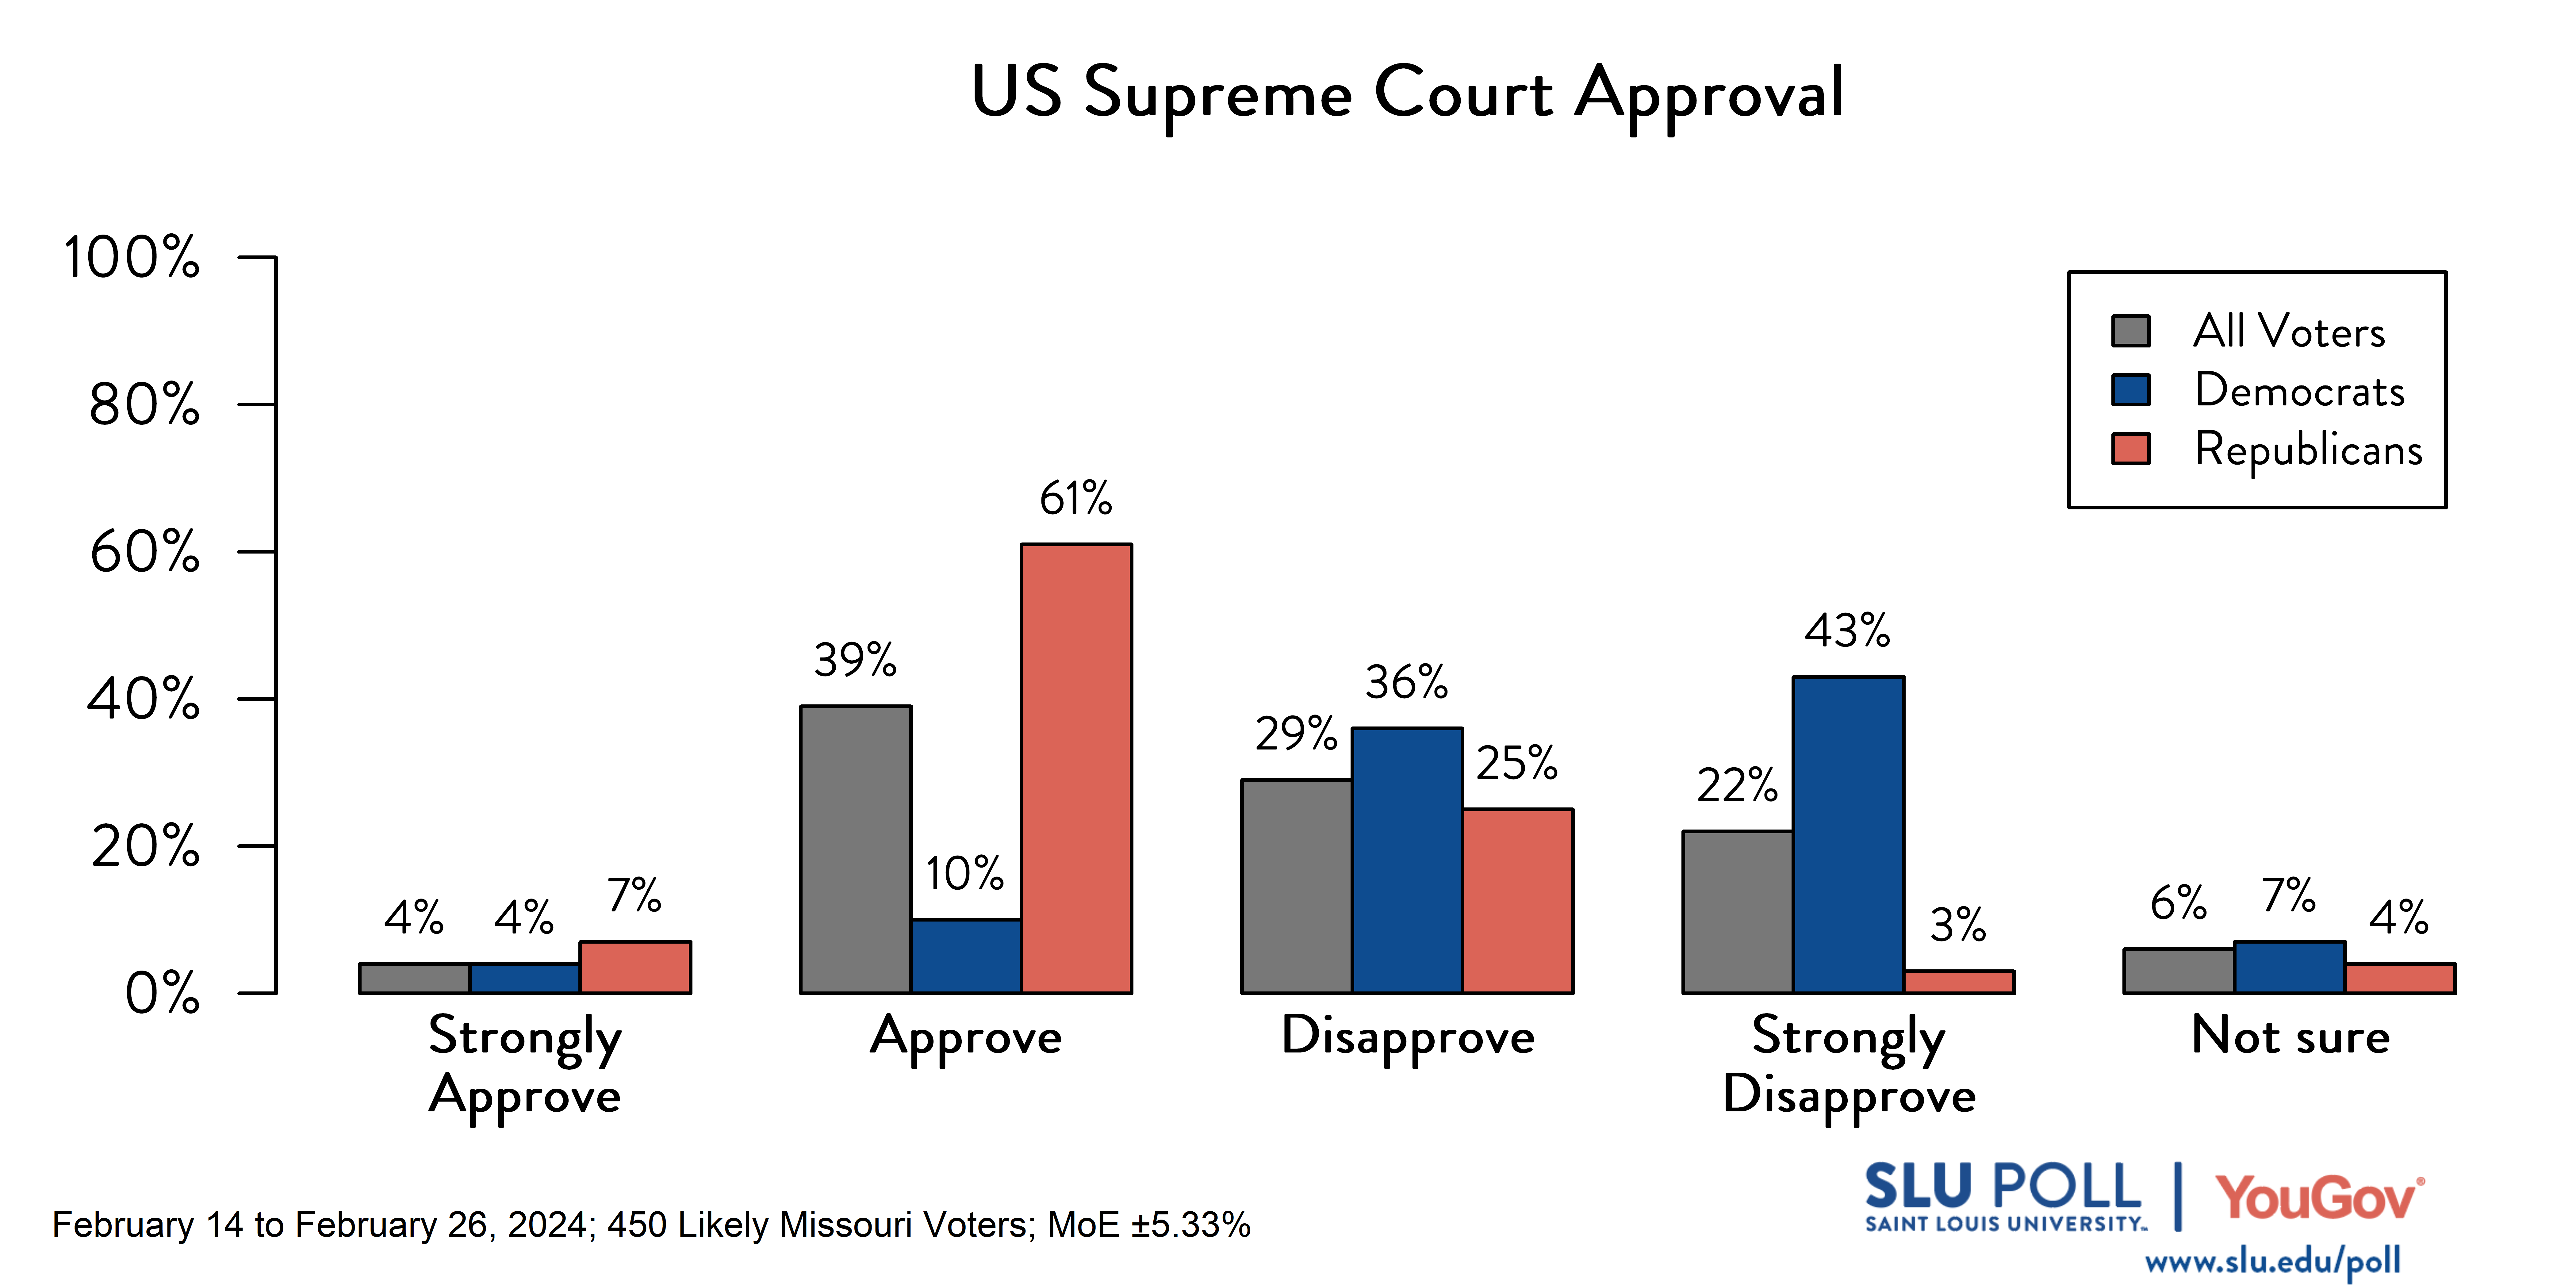 Likely voters' responses to 'Do you approve or disapprove of the way each is doing their job…The US Supreme Court?': 4% Strongly approve, 39% Approve, 29% Disapprove, 22% Strongly disapprove, and 6% Not sure. Democratic voters' responses: ' 4% Strongly approve, 10% Approve, 36% Disapprove, 43% Strongly disapprove, and 7% Not sure. Republican voters' responses:  7% Strongly approve, 61% Approve, 25% Disapprove, 3% Strongly disapprove, and 4% Not sure.